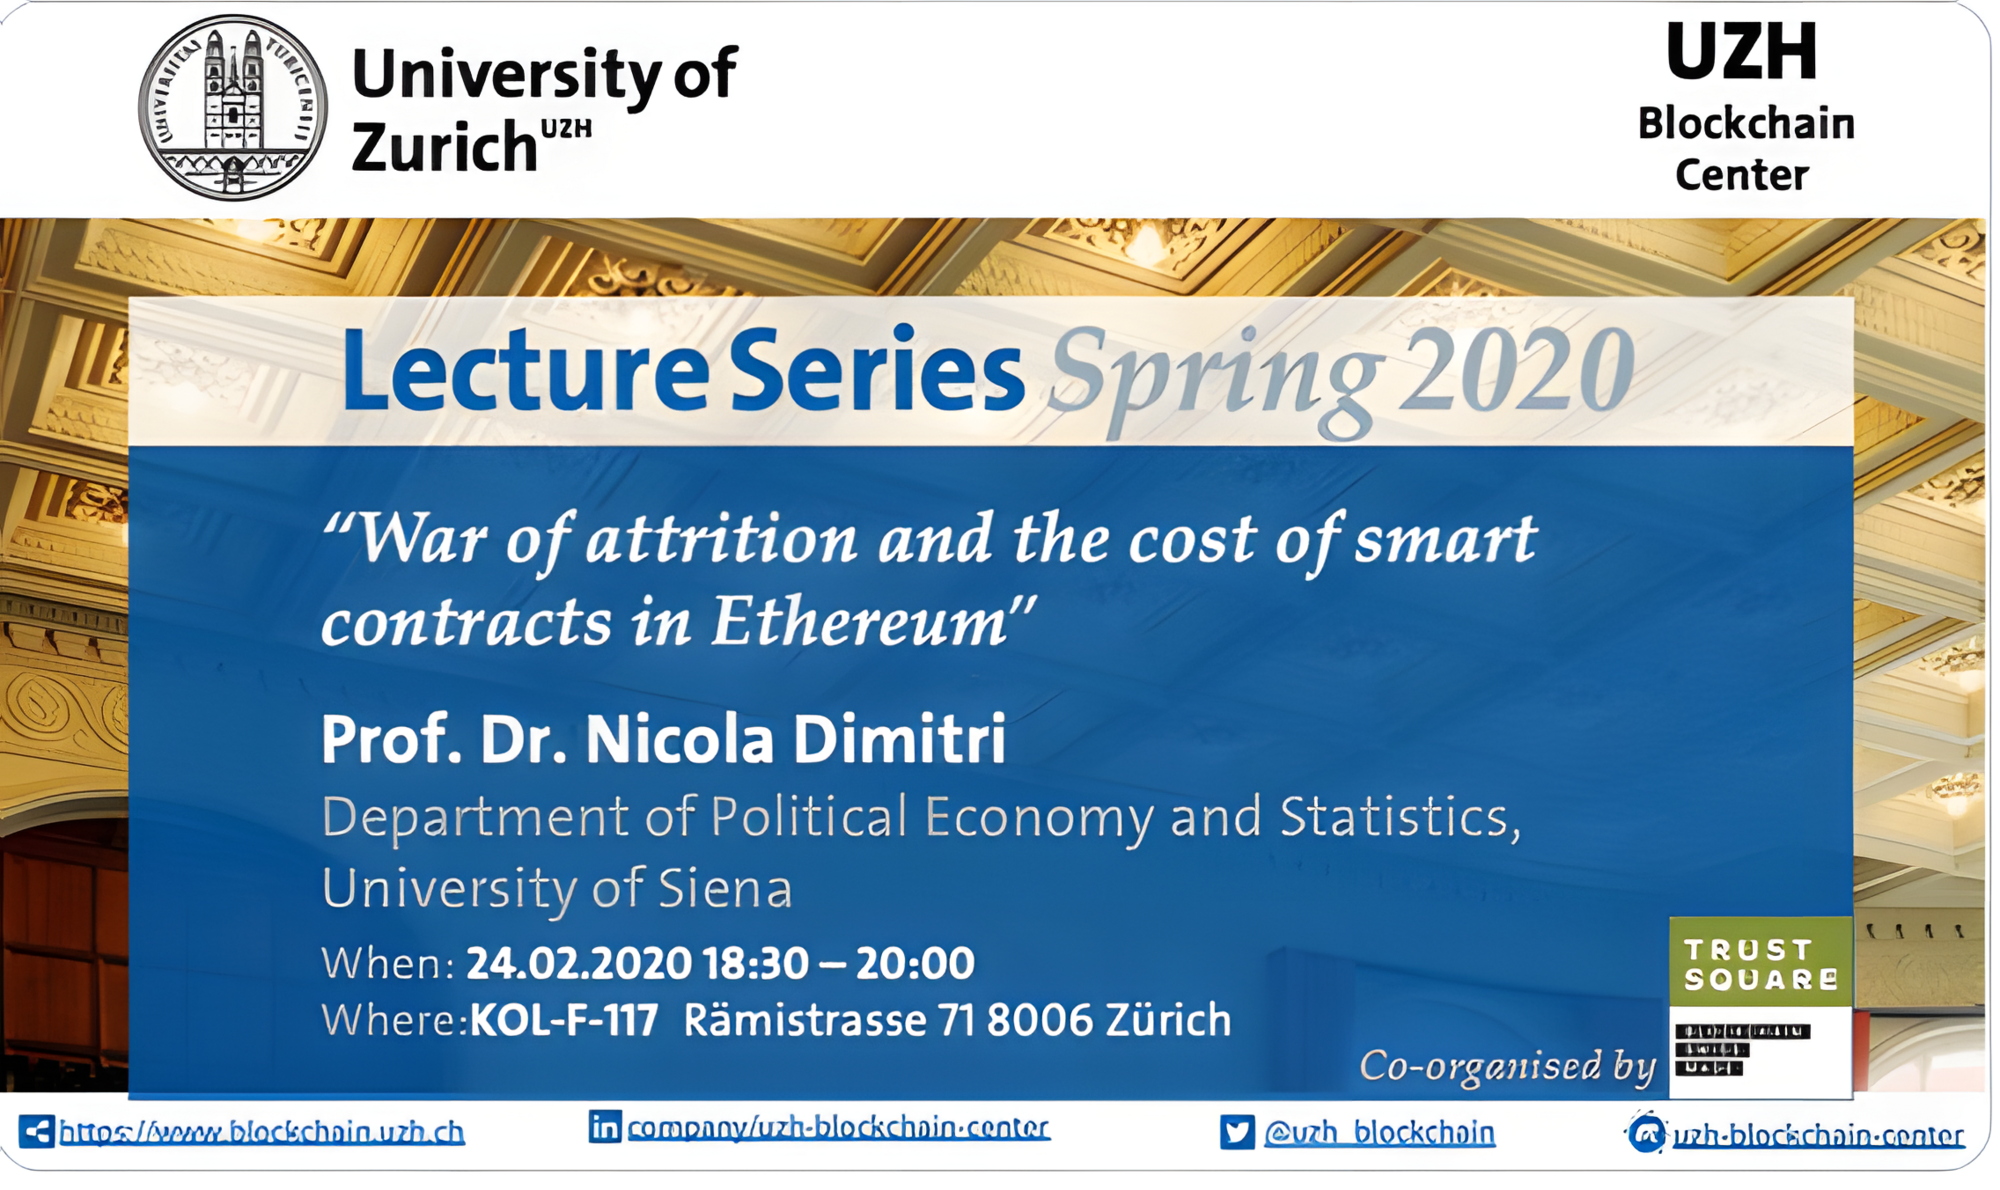   It is our pleasure to announce that during the Spring Term FS 2020 the upcoming Lecture Series of the Blockchain Center of UZH will welcome a number of distinguished experts with very interesting topics.  Prof. Nicola Dimitri, Ph.D. of the University of Sienna will talk about “War of Attrition and the Cost of Smart Contracts in Ethereum”.